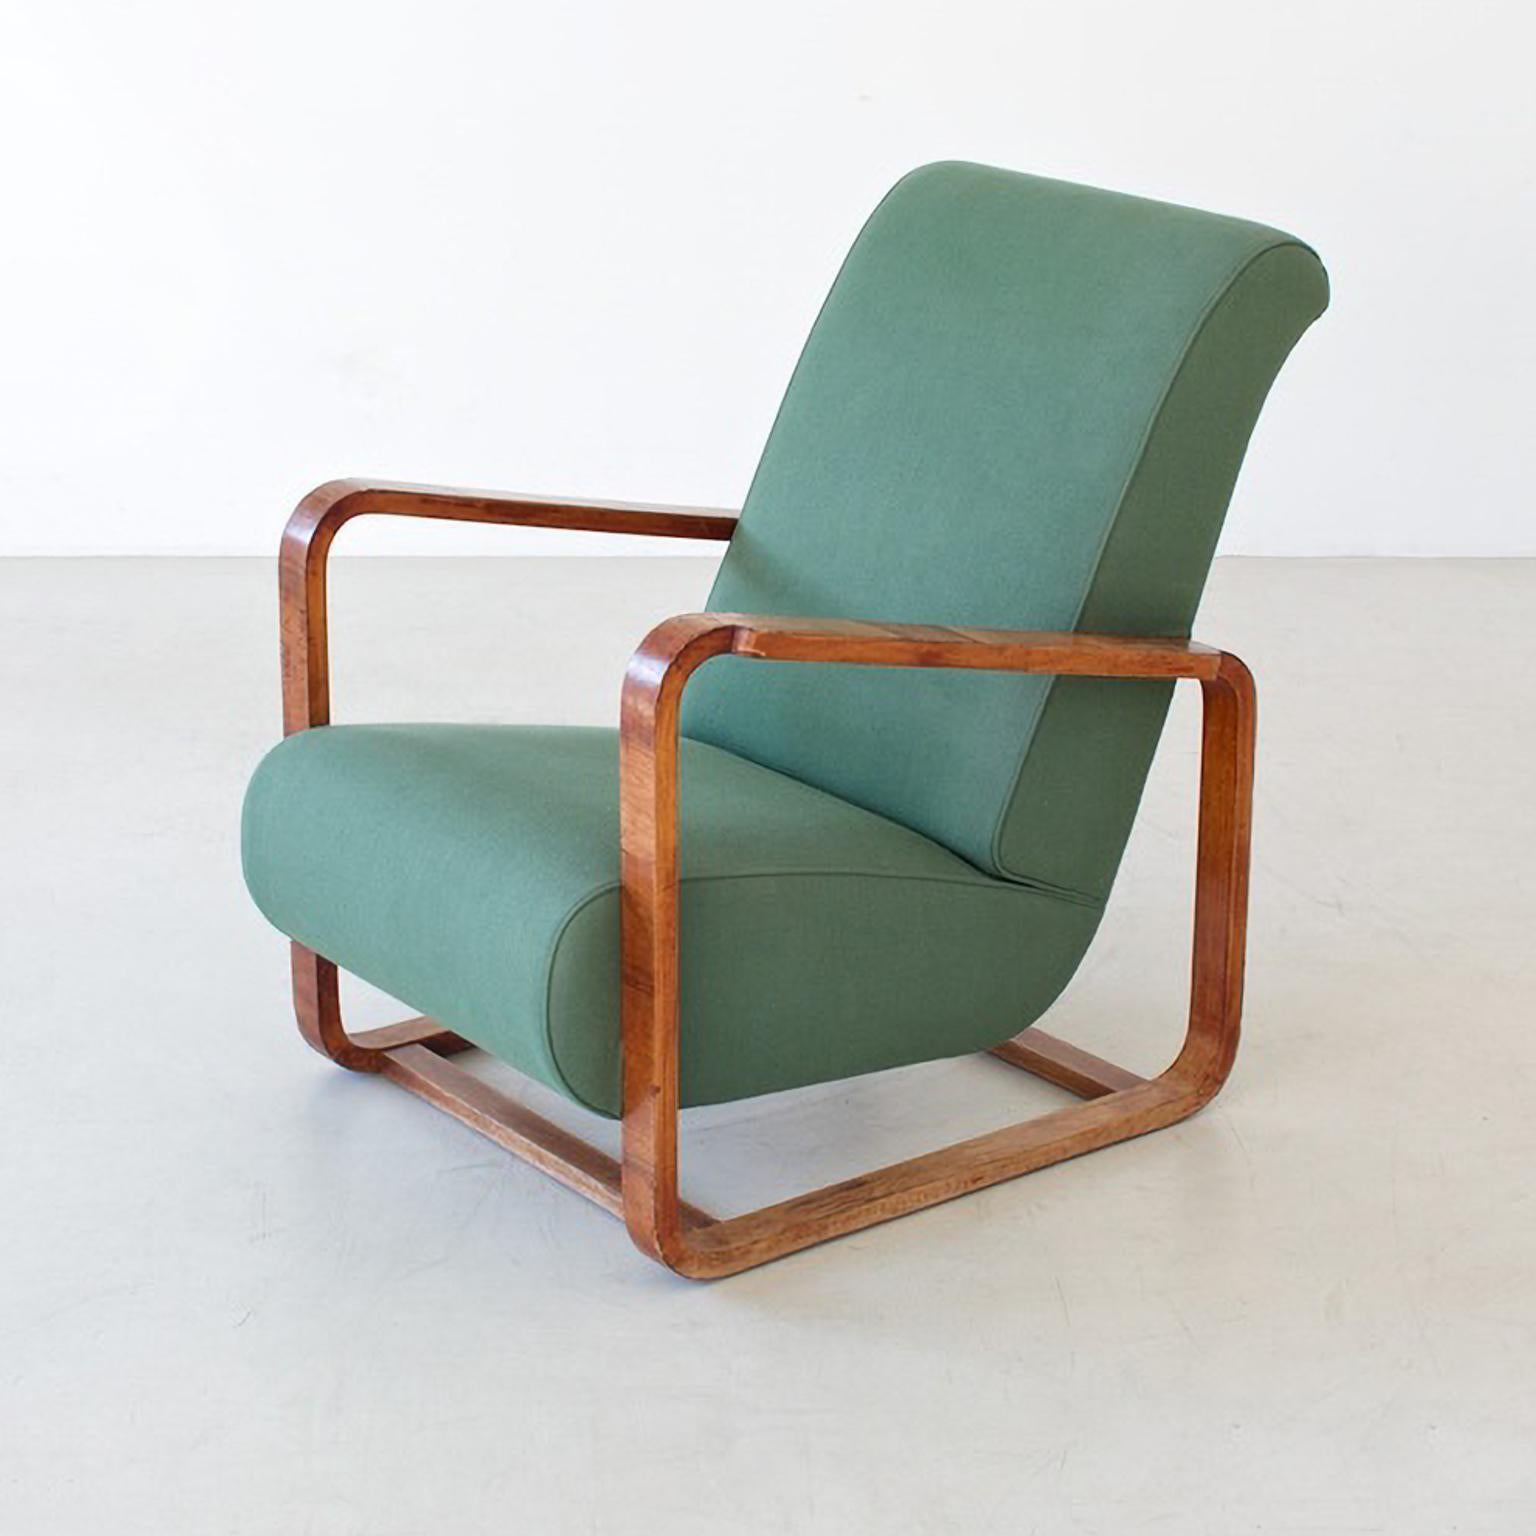 Modernist High Back Armchairs, Walnut Veneer Fabric/ Leather Upholstery, Bespoke In Good Condition For Sale In Berlin, DE